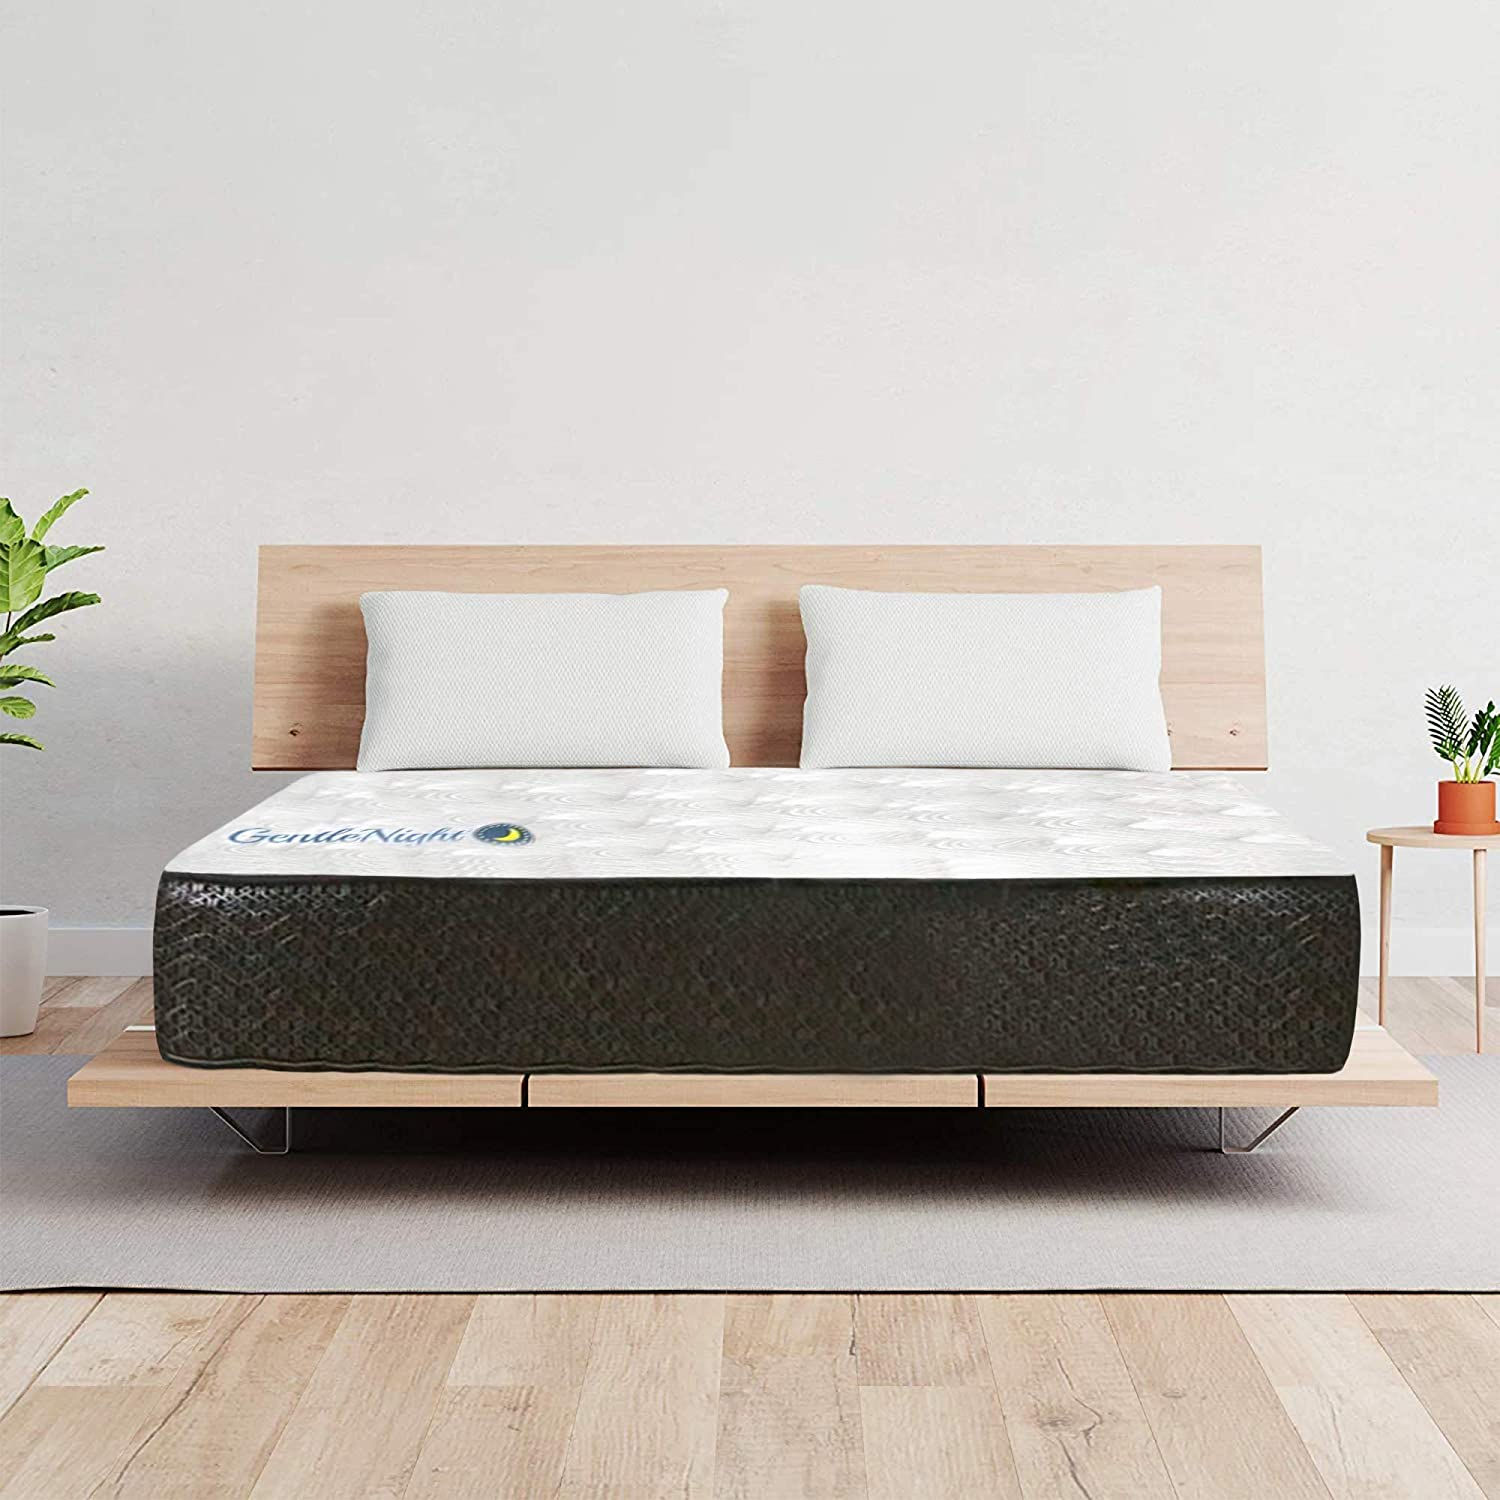 Choose a reflex foam mattress like this one as it is effective when it comes to spinal alignment and chronic back pain. 